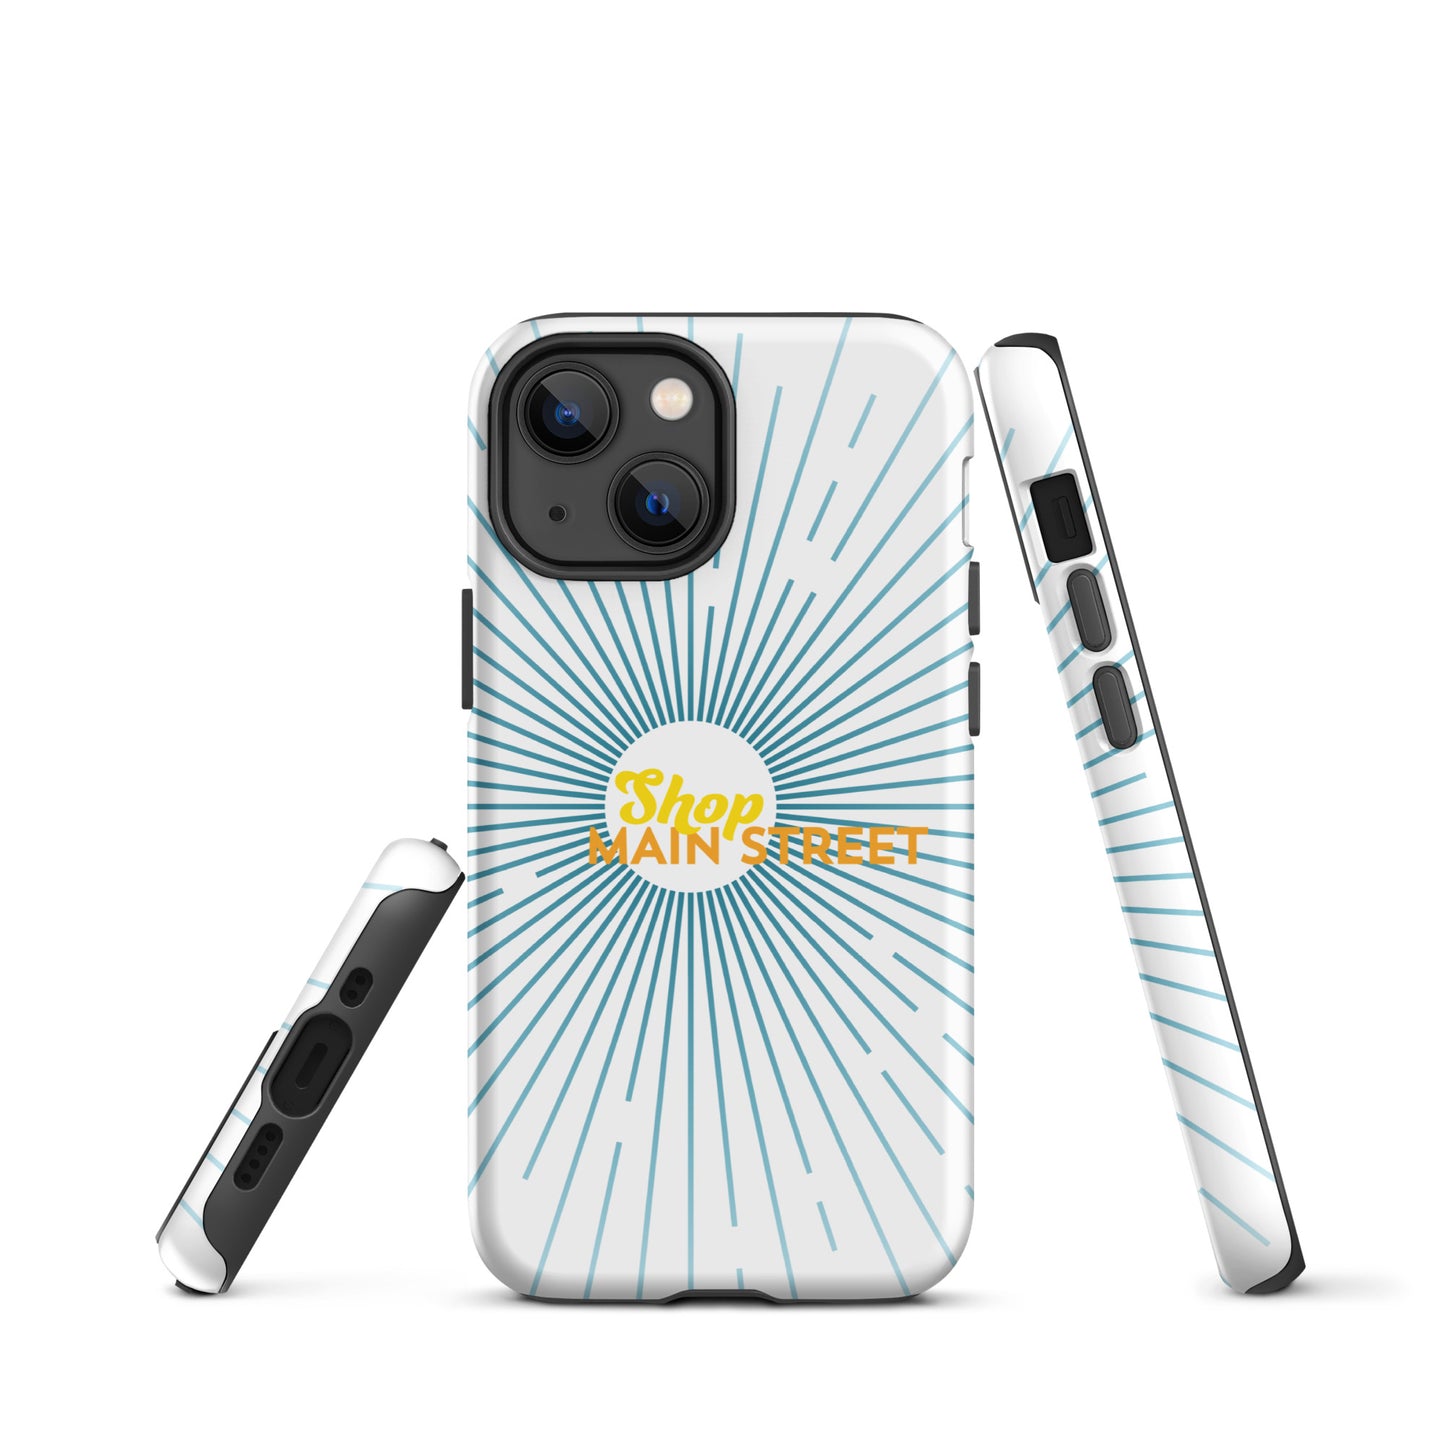 "Shop Main Street" (Blue and Yellow) Tough Case for iPhone®